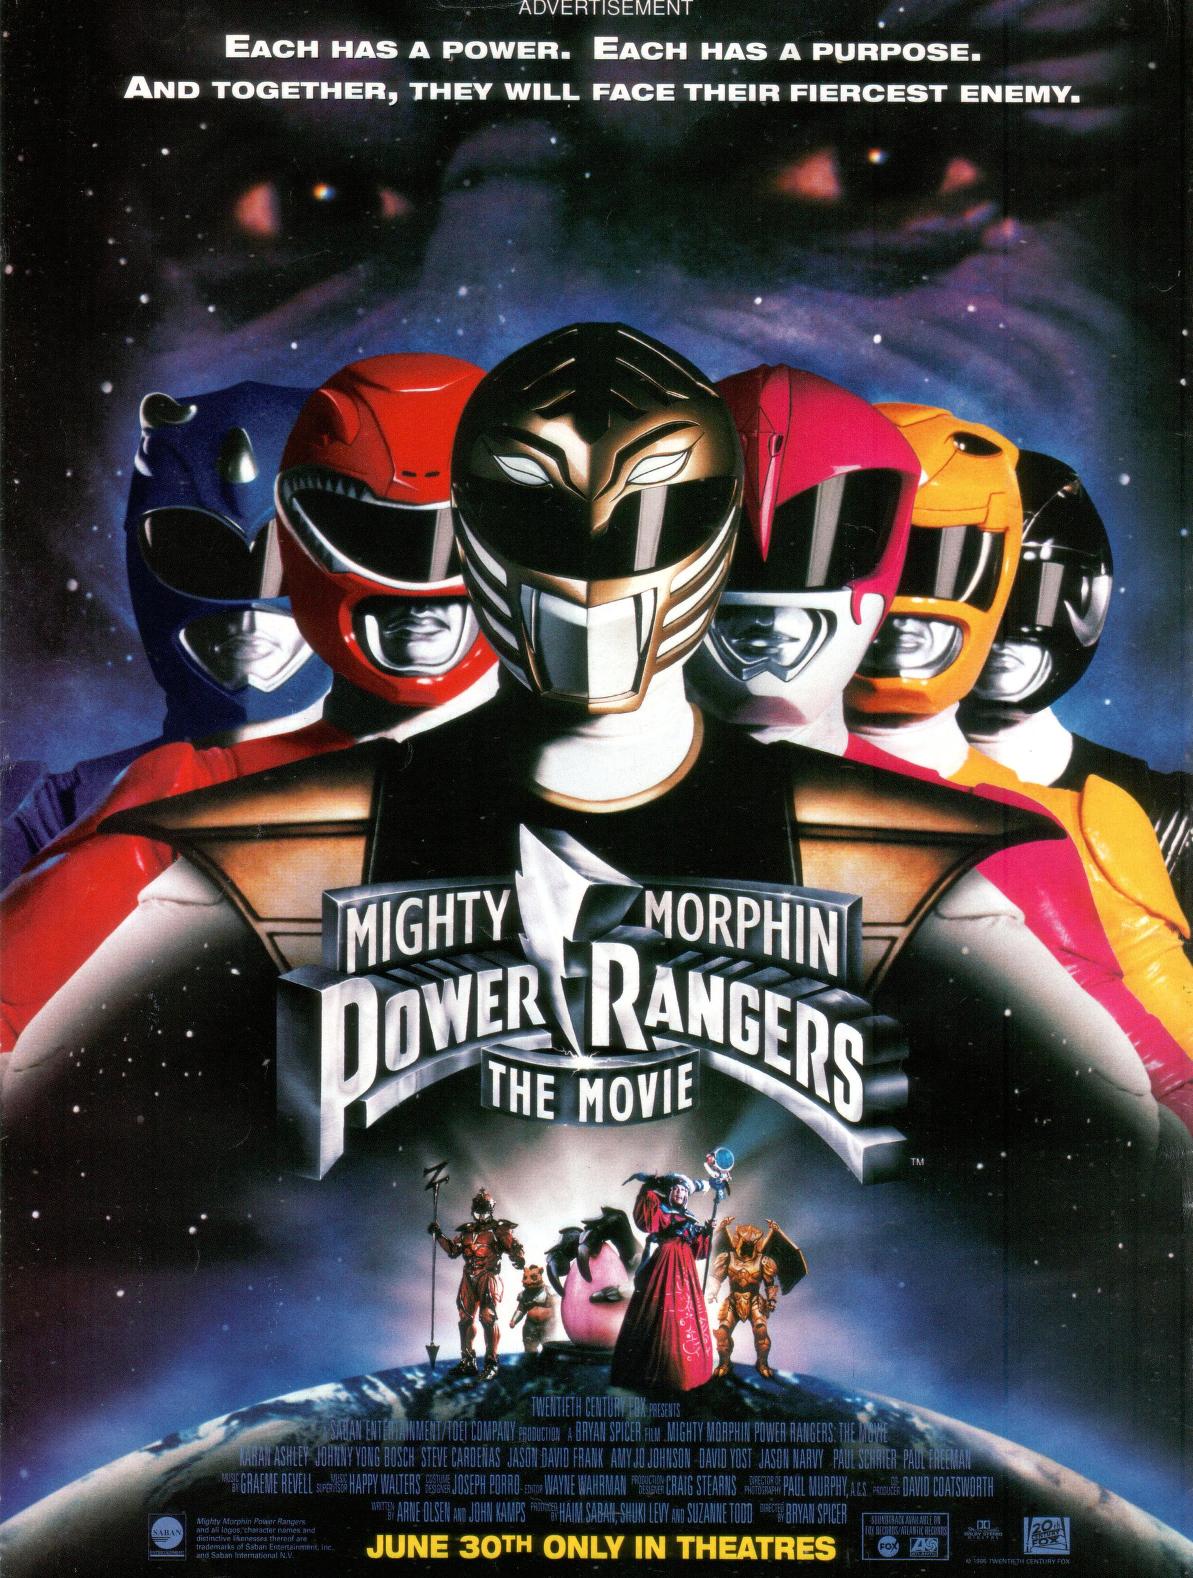 Mighty Morphin' Power Rangers Magazine (Summer 1995) : Free Download,  Borrow, and Streaming : Internet Archive